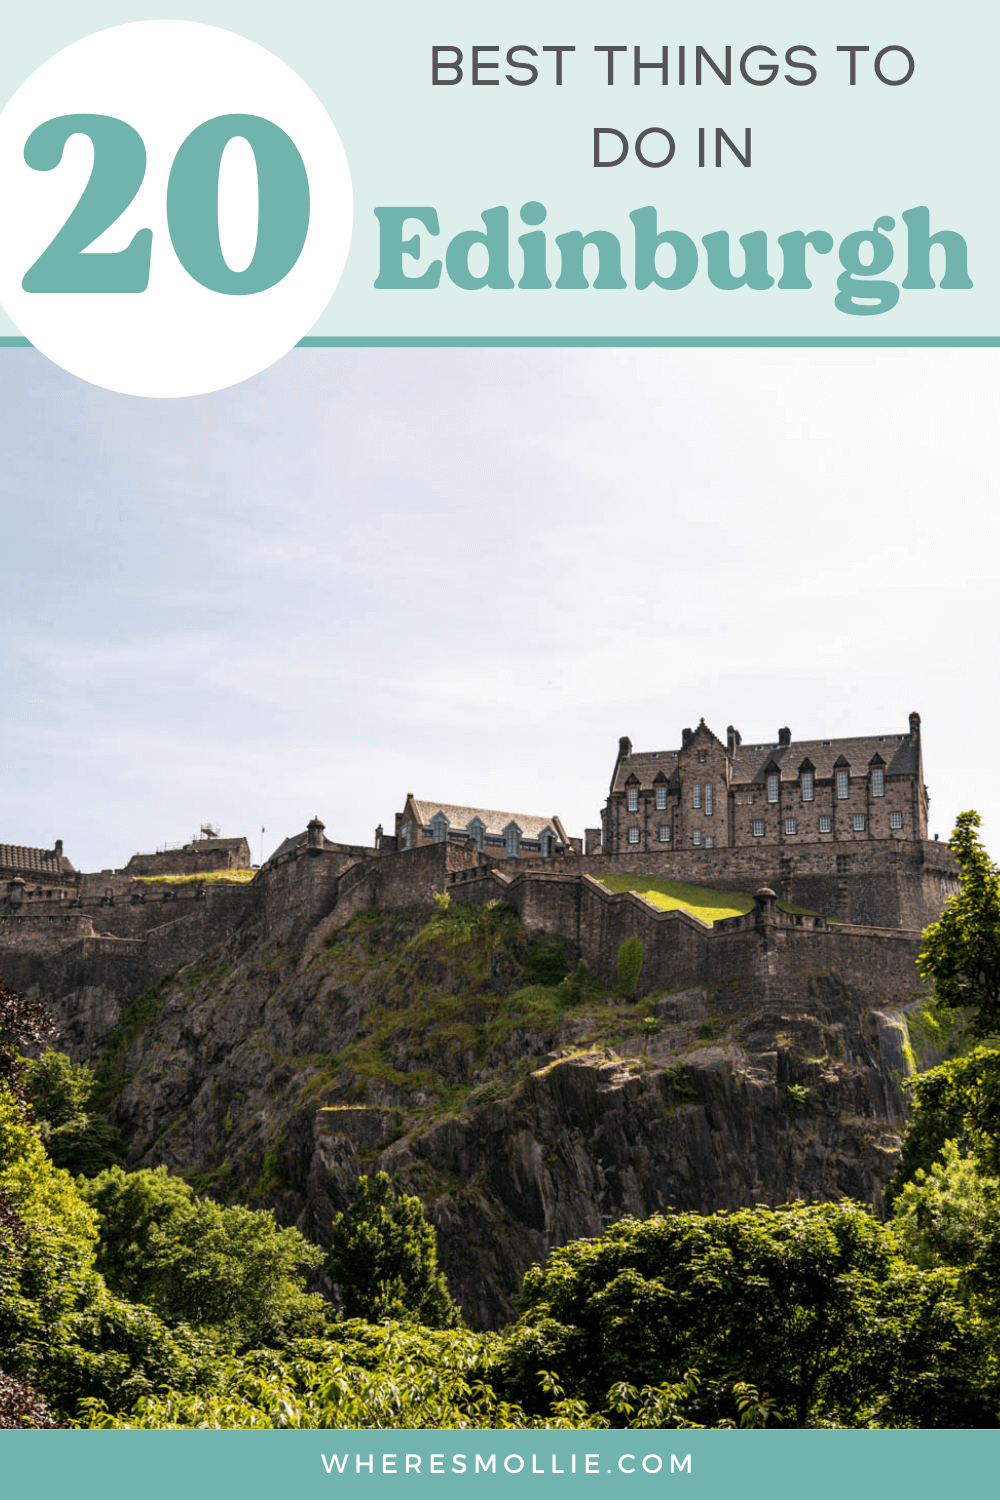 The best things to do in Edinburgh, Scotland